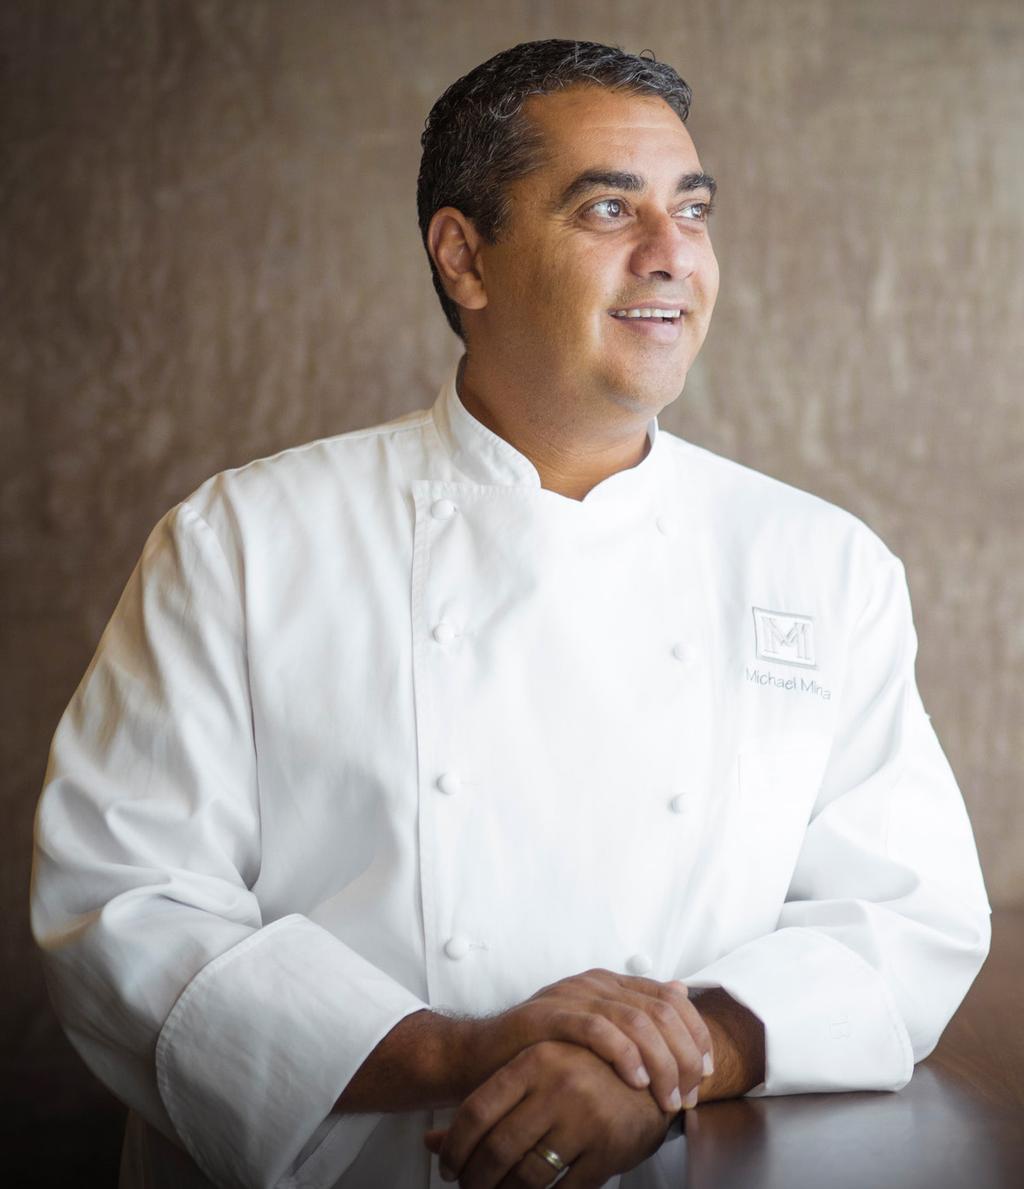 MICHAEL Mina CHEF/OWNER MINA GROUP Michael Mina s story is one of two decades of influence, passion and achievement.